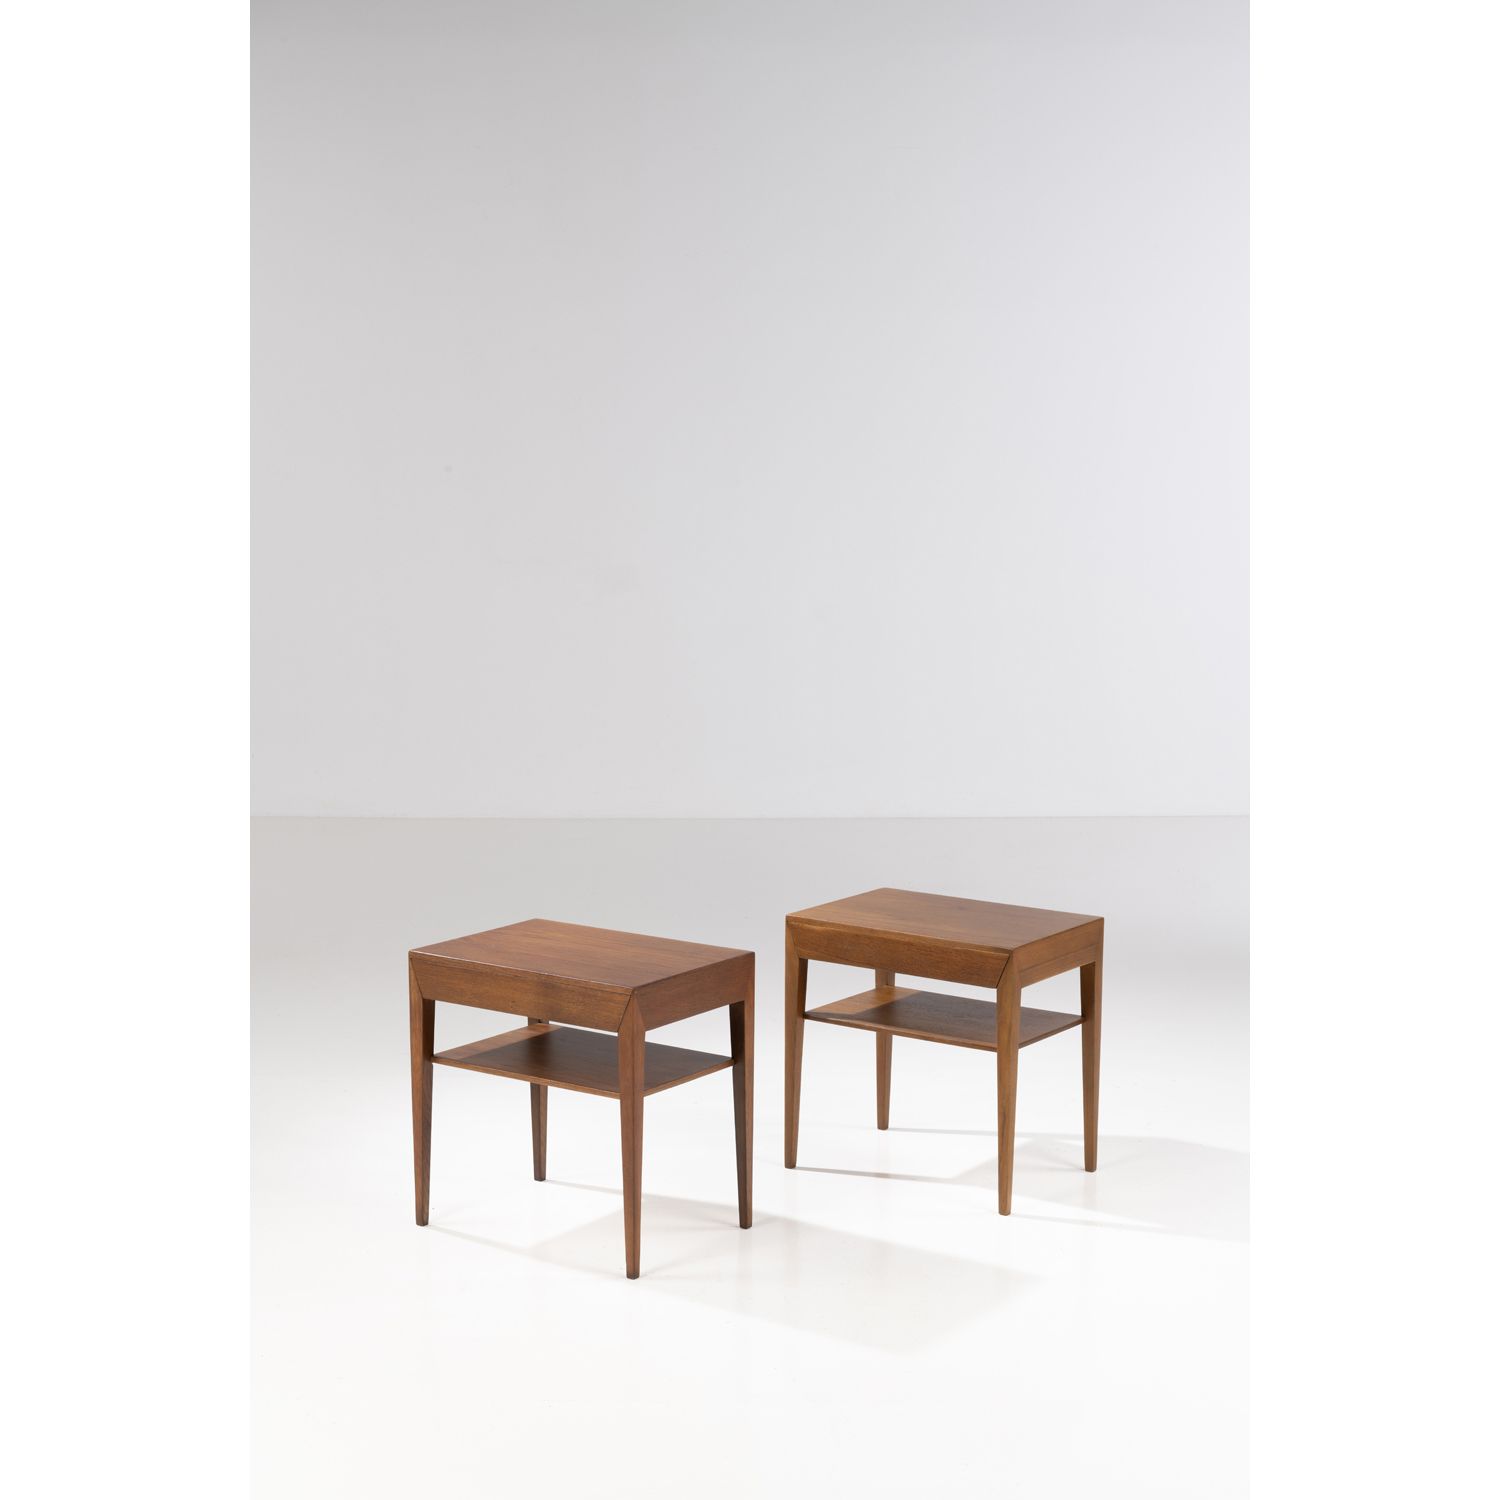 Null Severin Hansen (1887-1964)

Pair of side tables

Rosewood

Edited by Haslev&hellip;